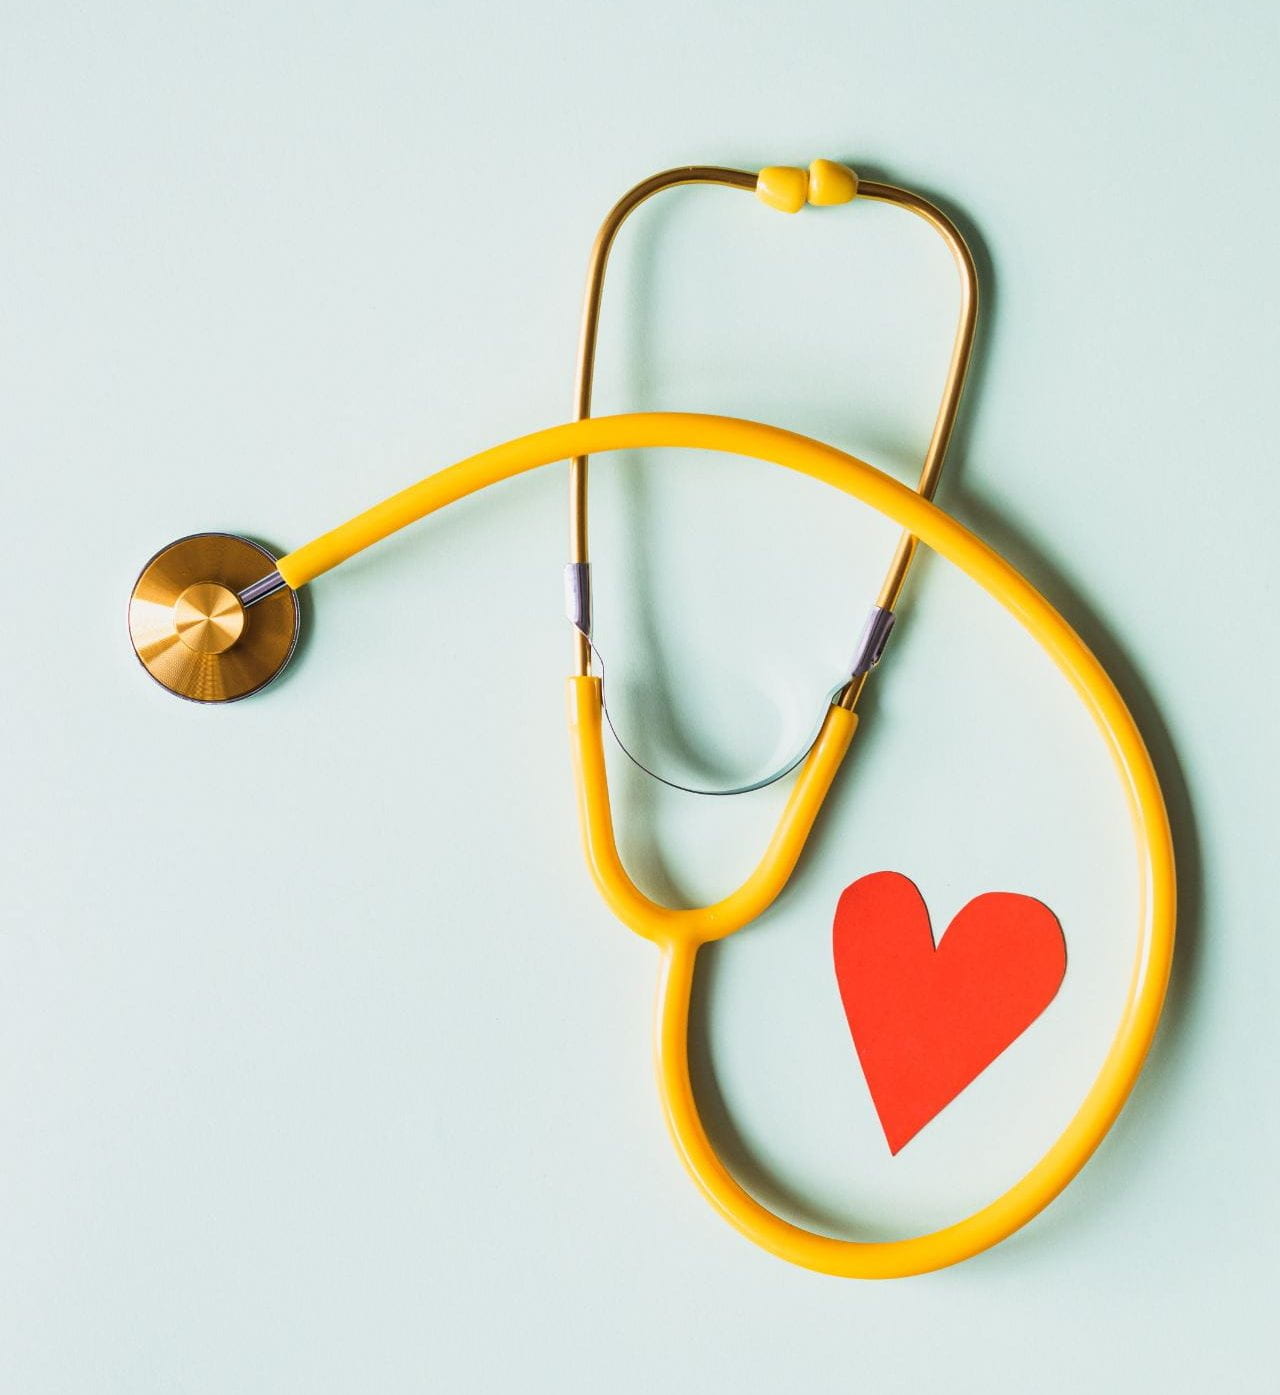 a stethoscope and a red paper heart